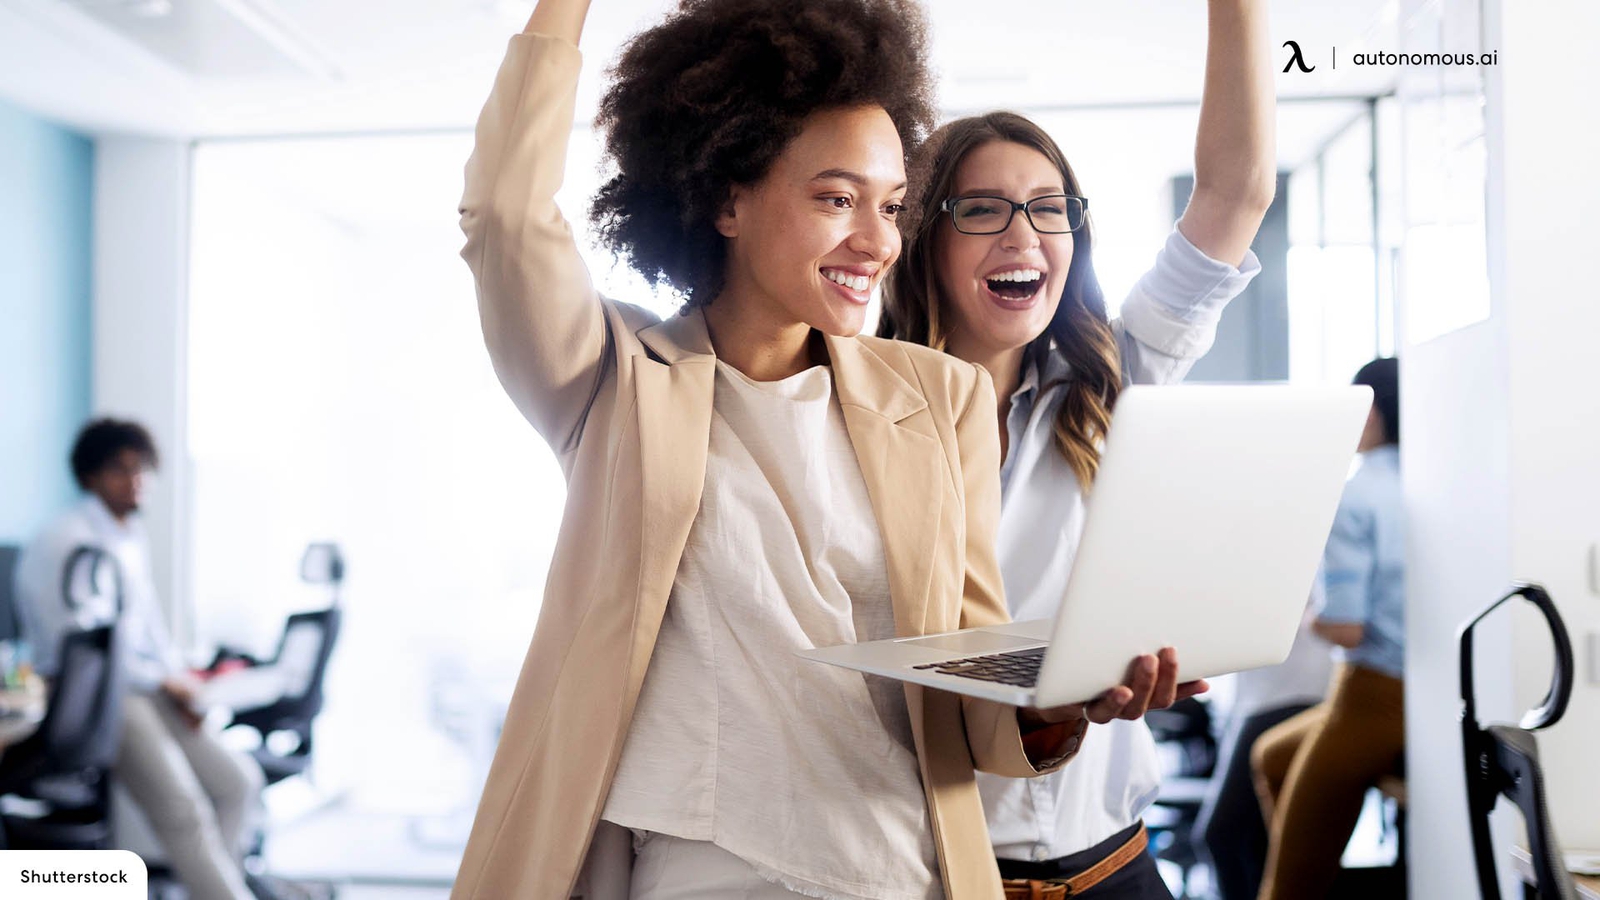 How to Build a Great Employee Perks Program: Tips for Businesses